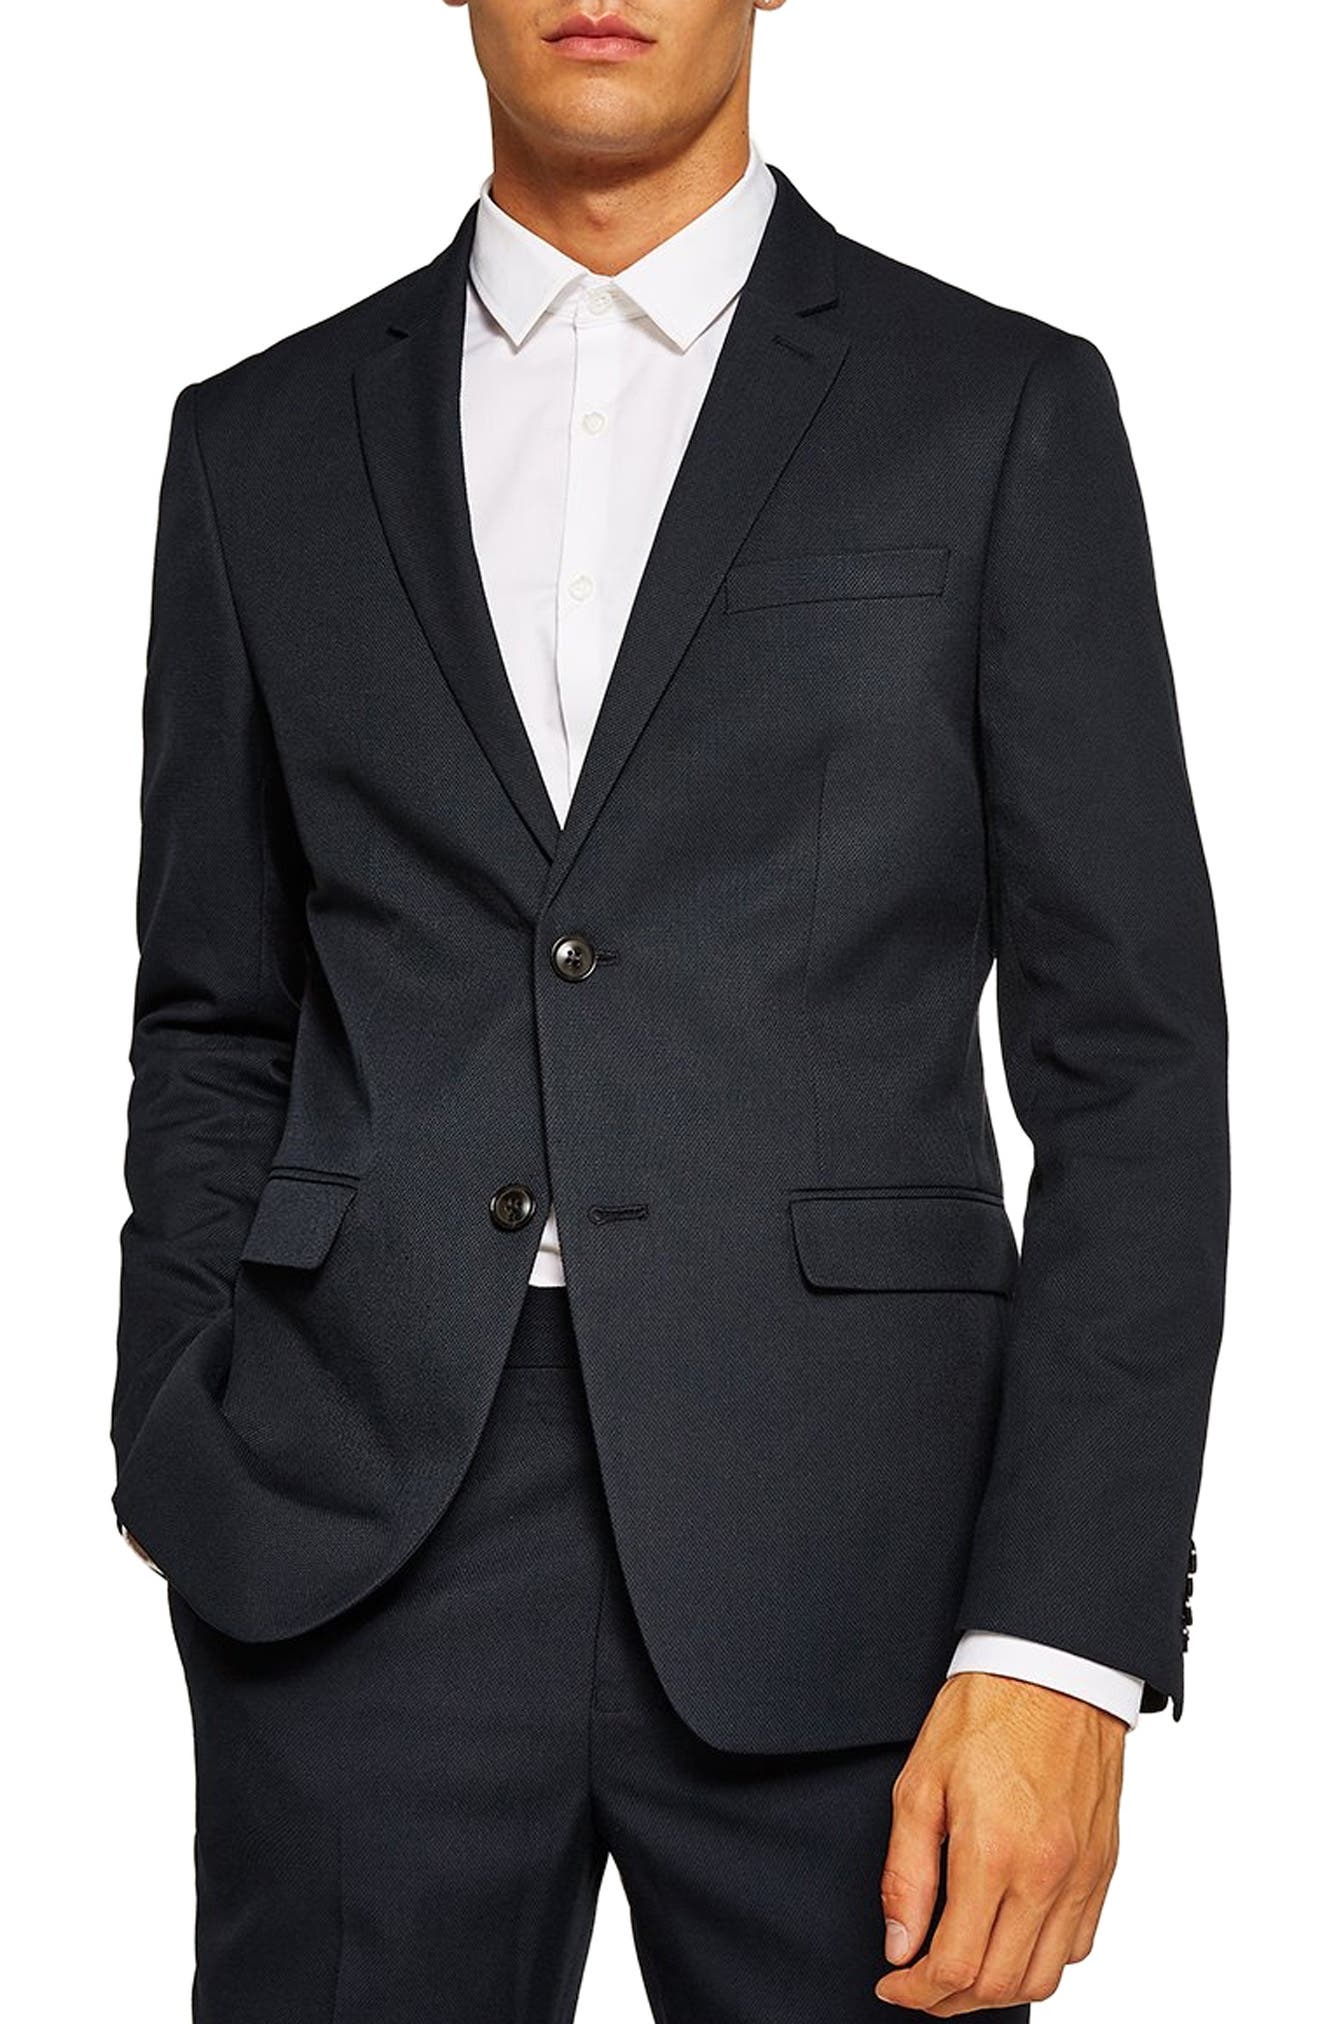 Cuekondy Mens Stylish Blazer Casual Solid Color Business Wedding Party Outwear Coat Suit Tops Classic Fit Sport Jacket